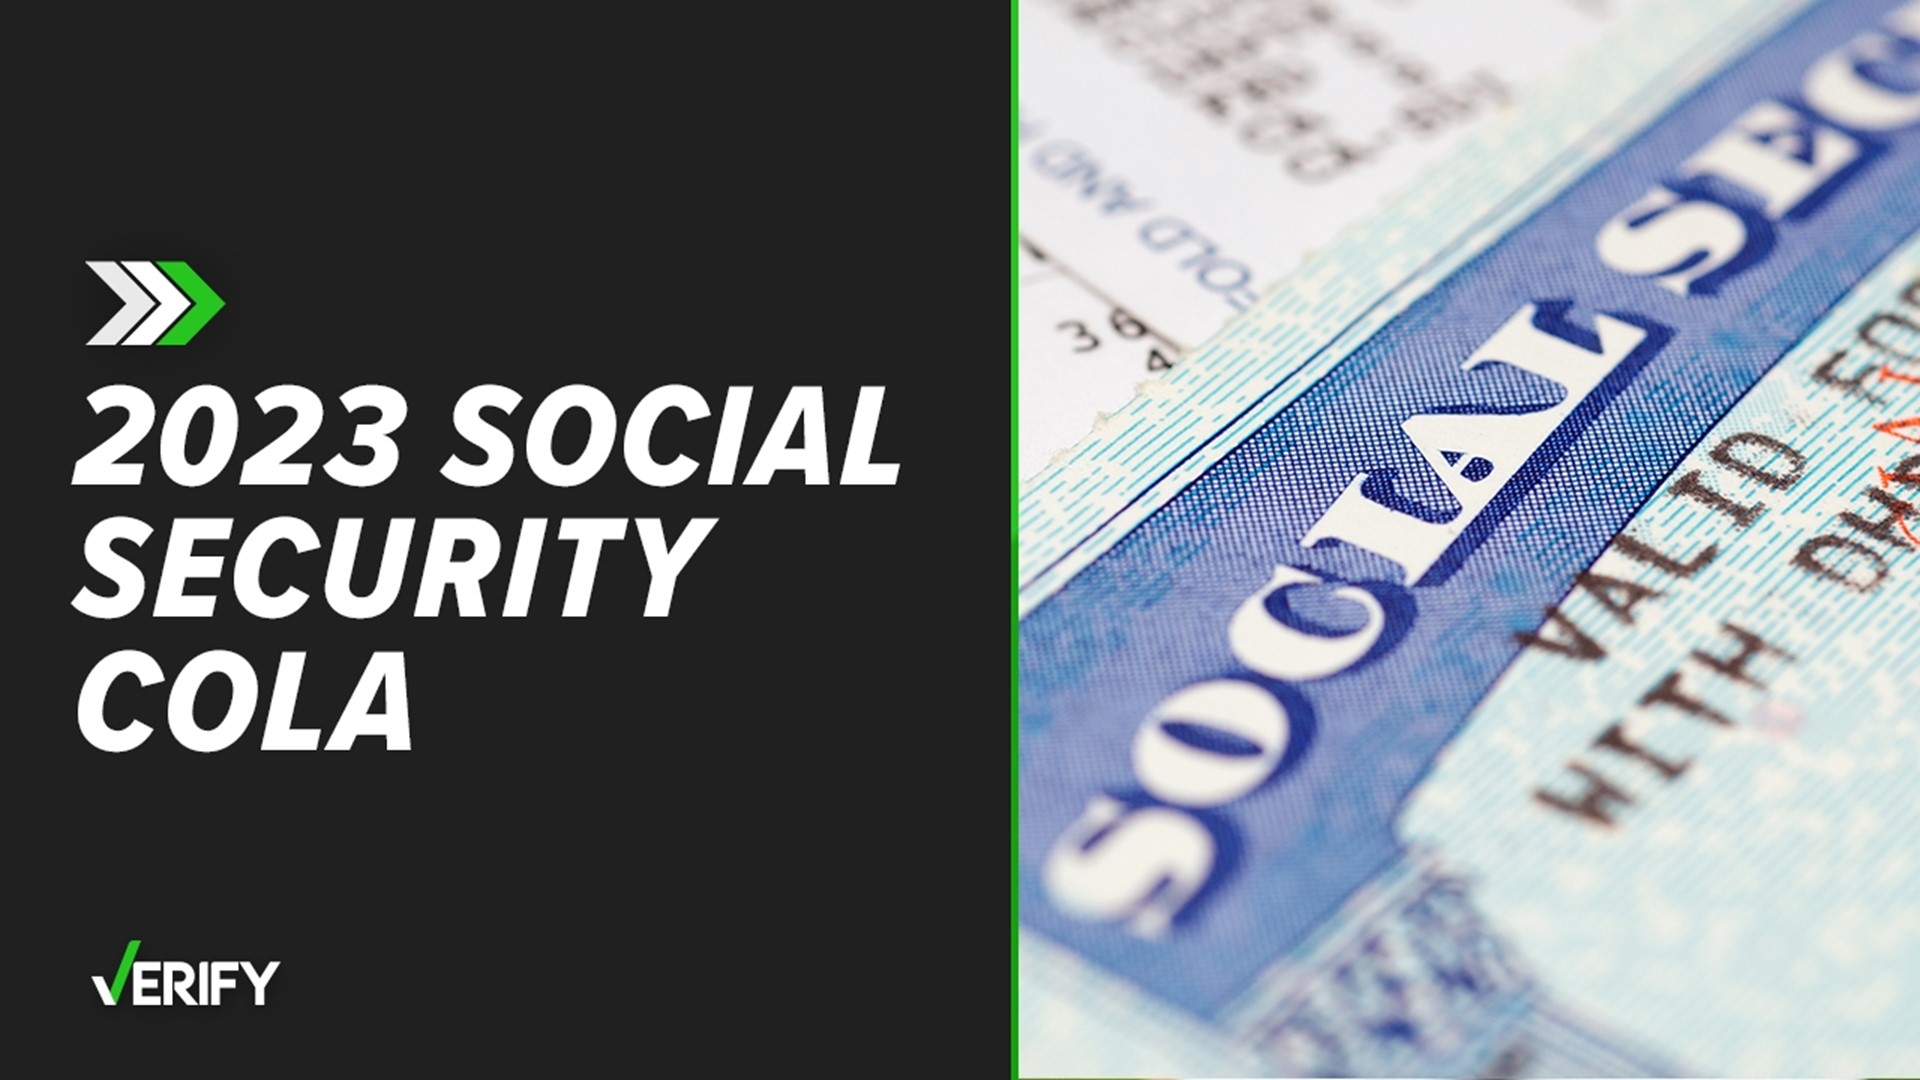 Yes, Social Security’s 2023 costofliving adjustment is the largest